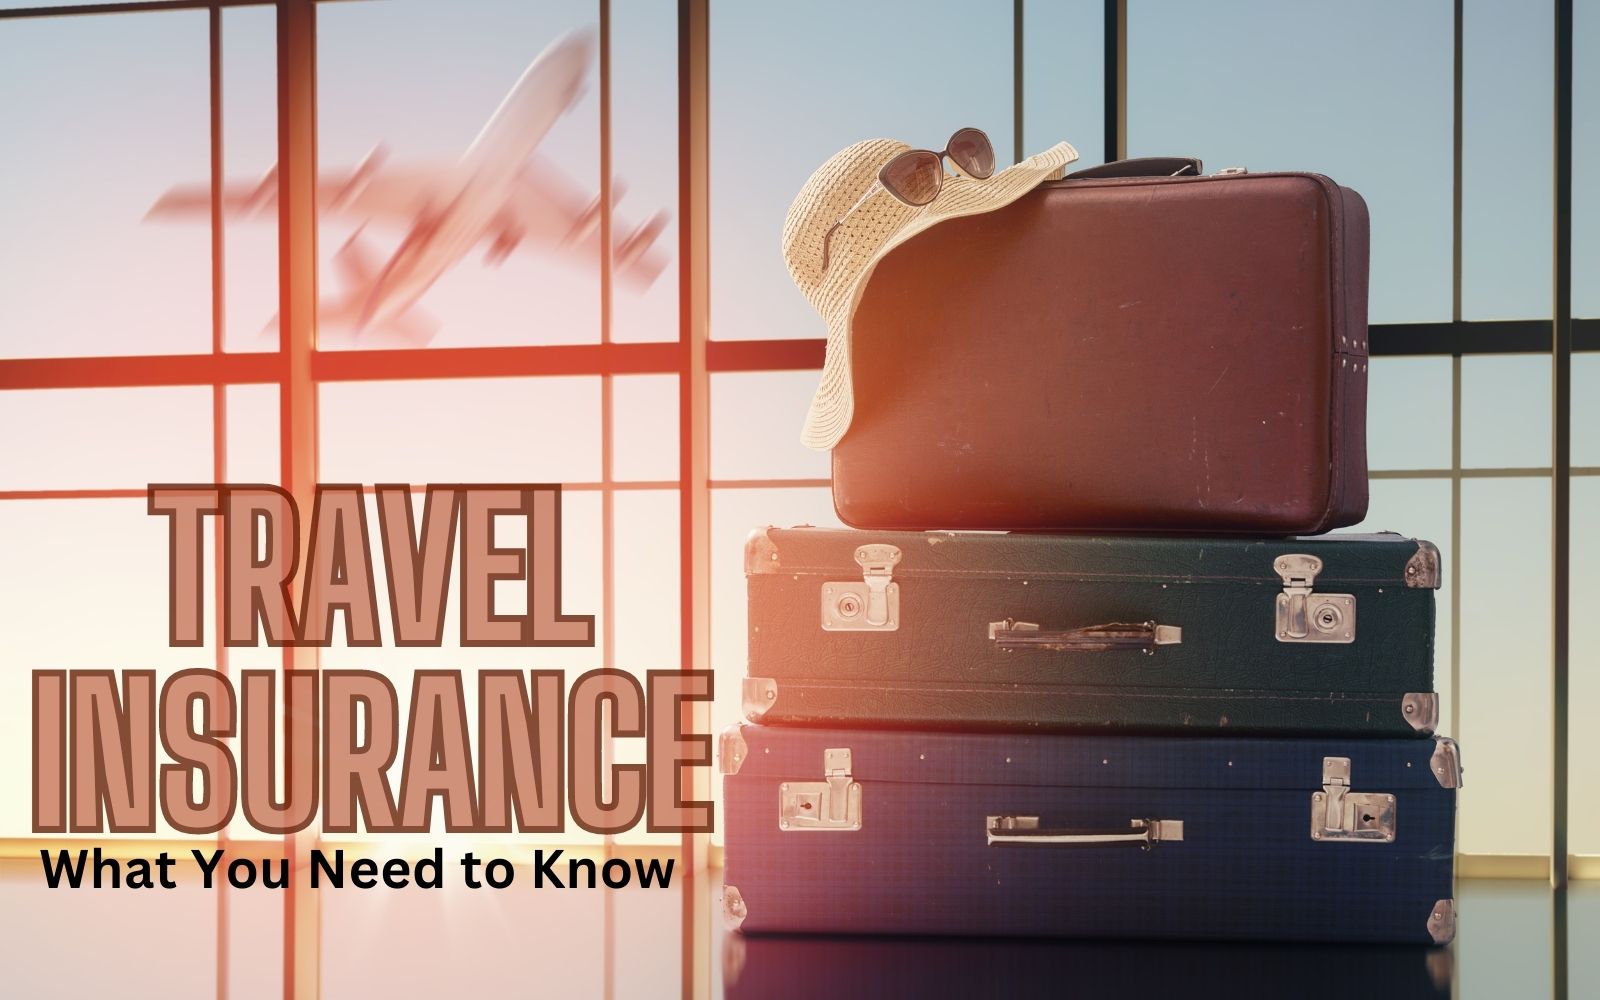 holiday travel insurance and what you need to know